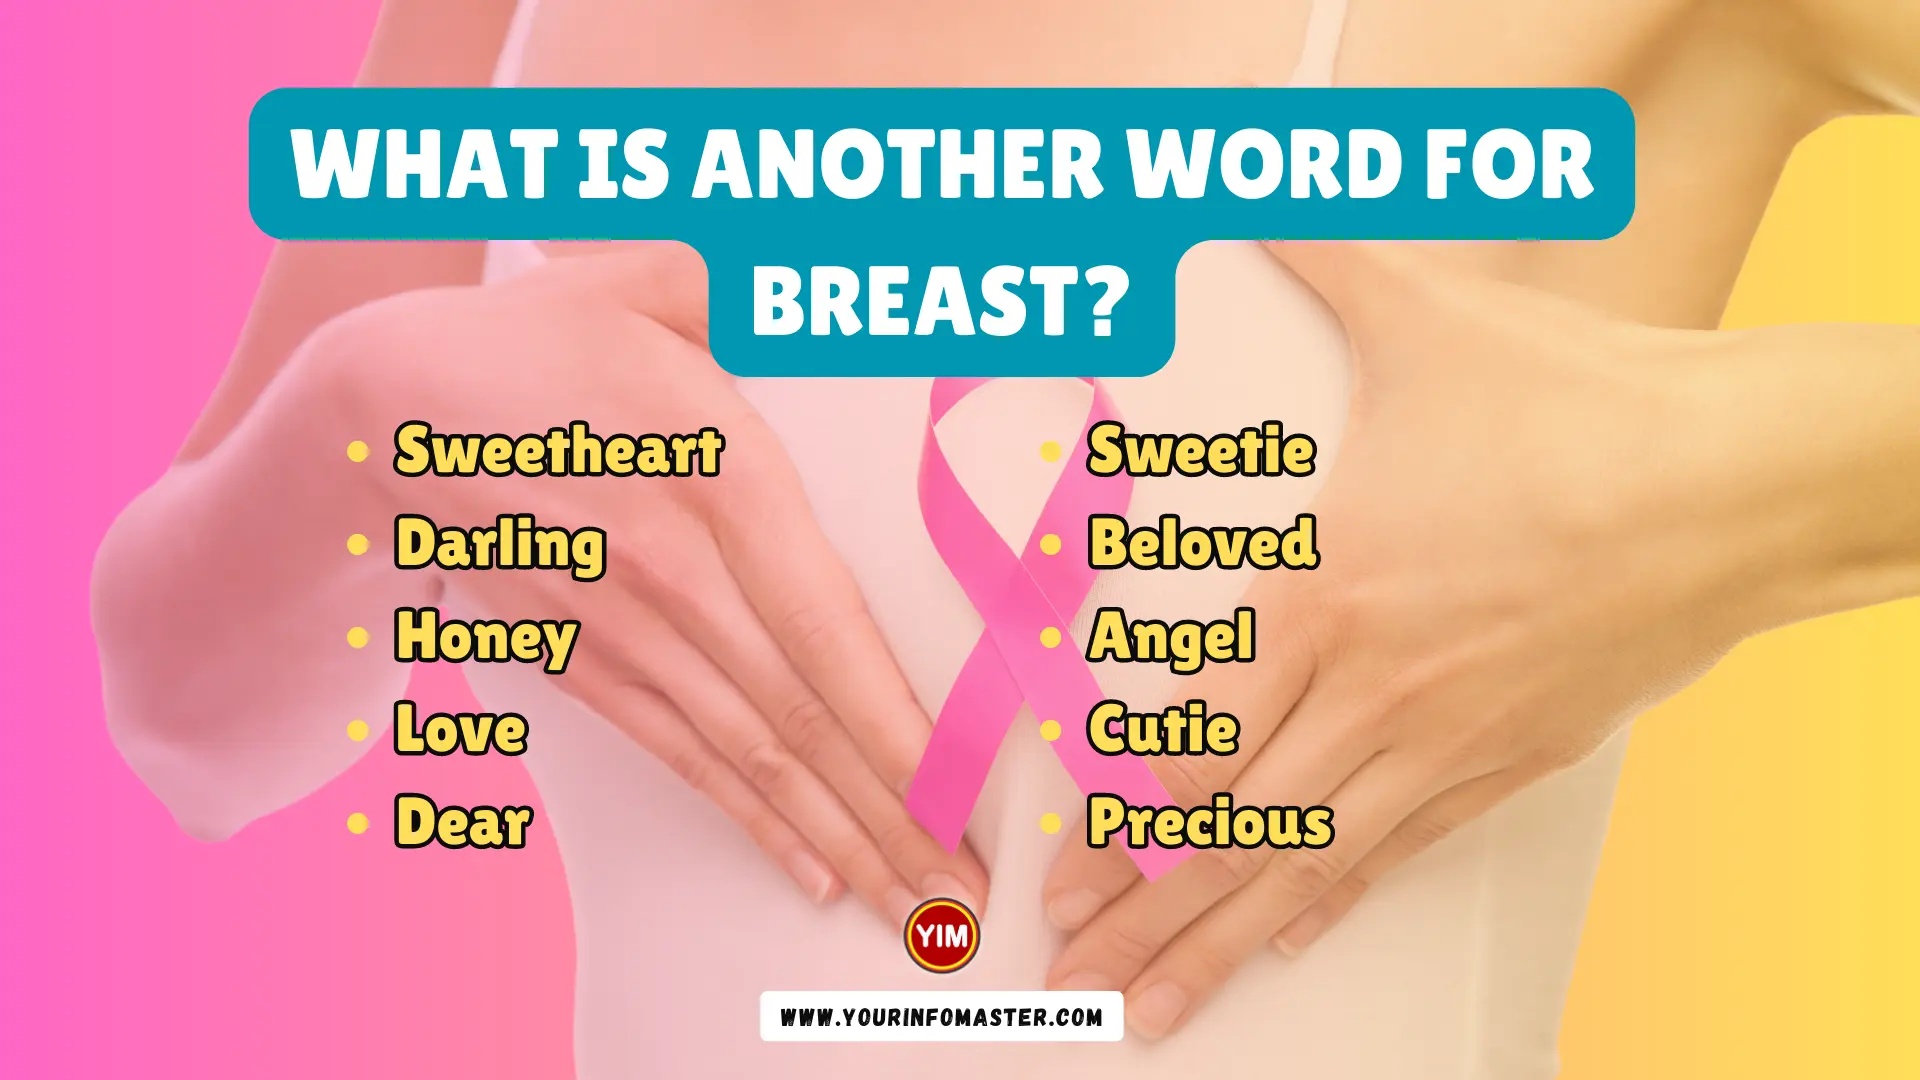 What is another word for Breast